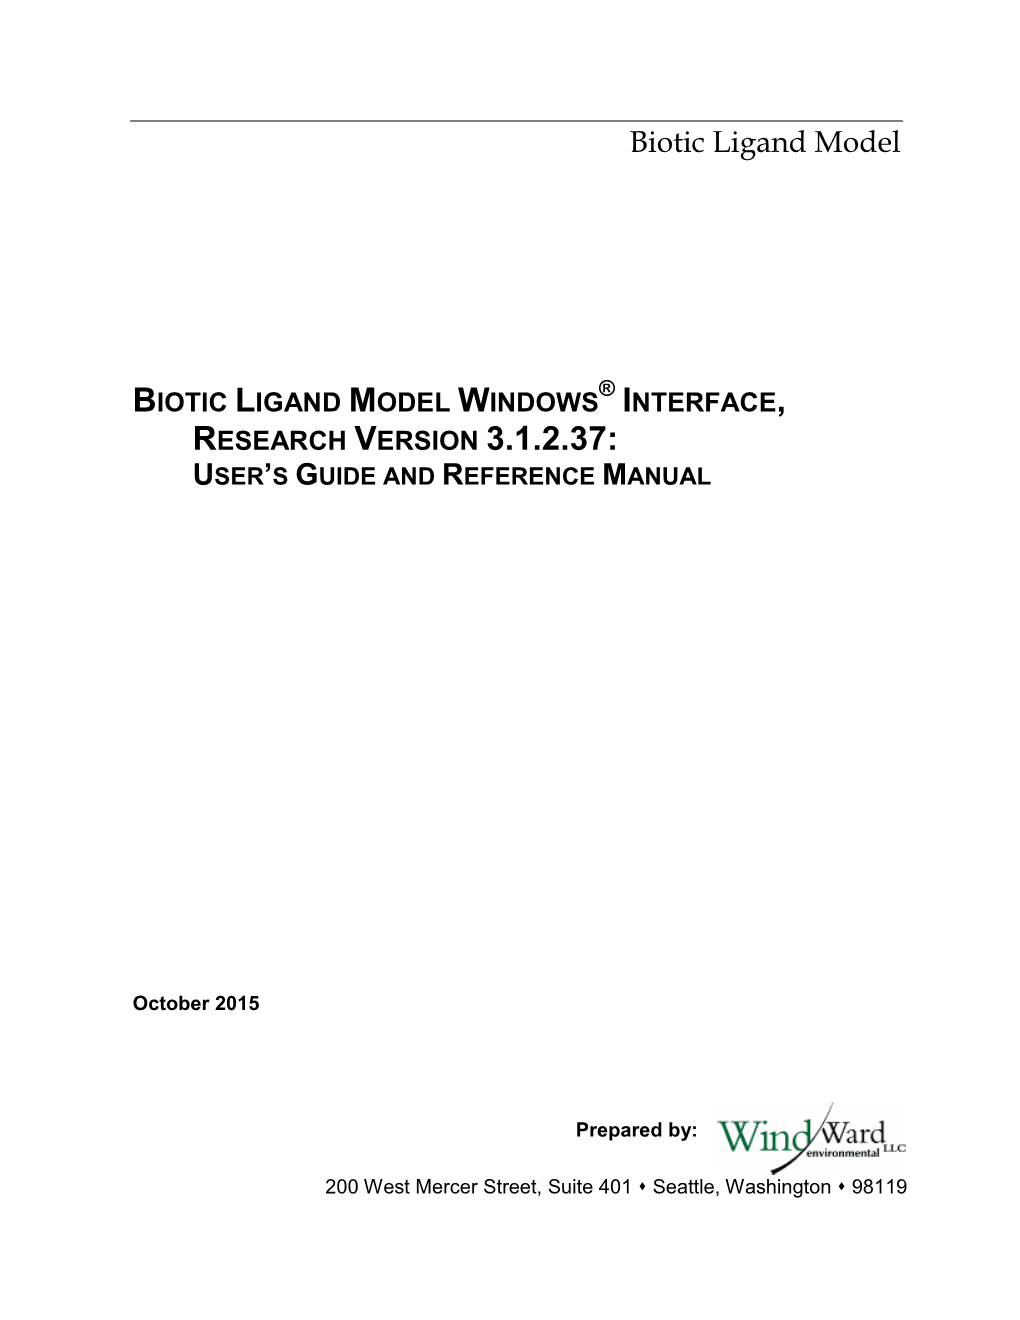 Biotic Ligand Model Windows Interface, Research Version 3.1.2.37: User’S Guide and Reference Manual